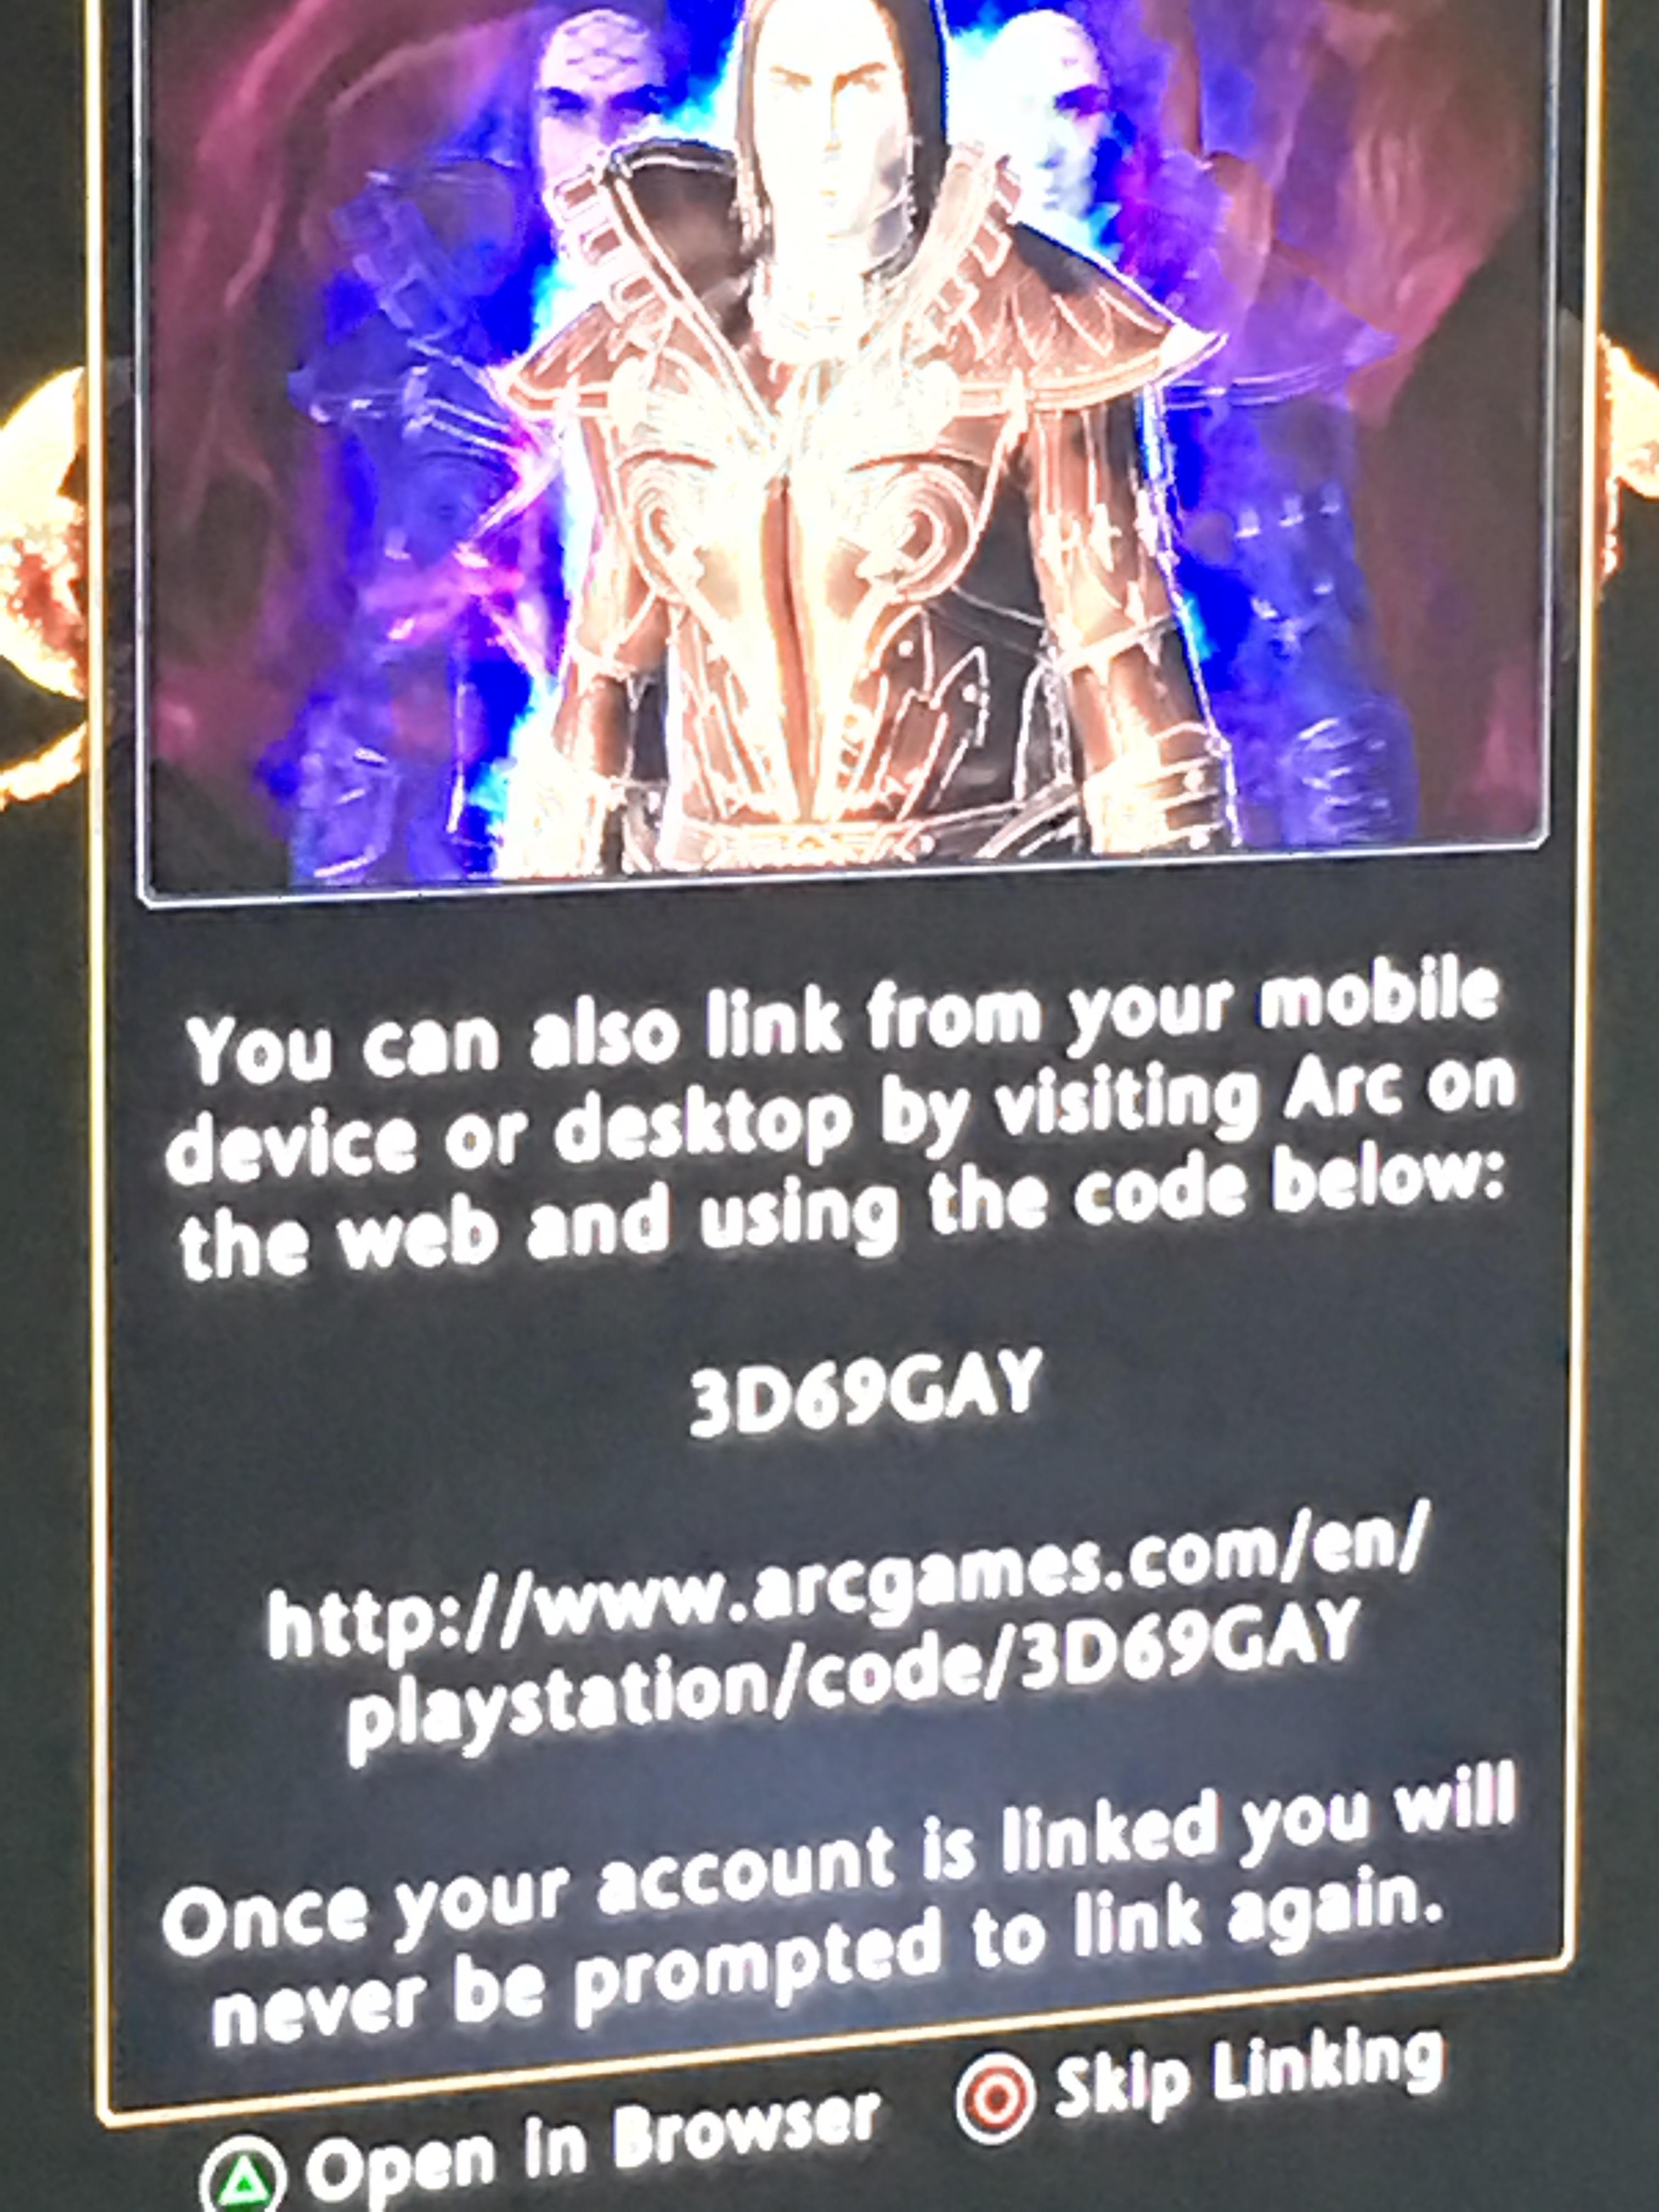 fictional character - You can also link from your mobile device or desktop by visiting Arc on the web and using the code below 3D69GAY playstationcode3D69GAY Once your account is linked you will never be prompted to link again. Open In Browser Skip Linkin